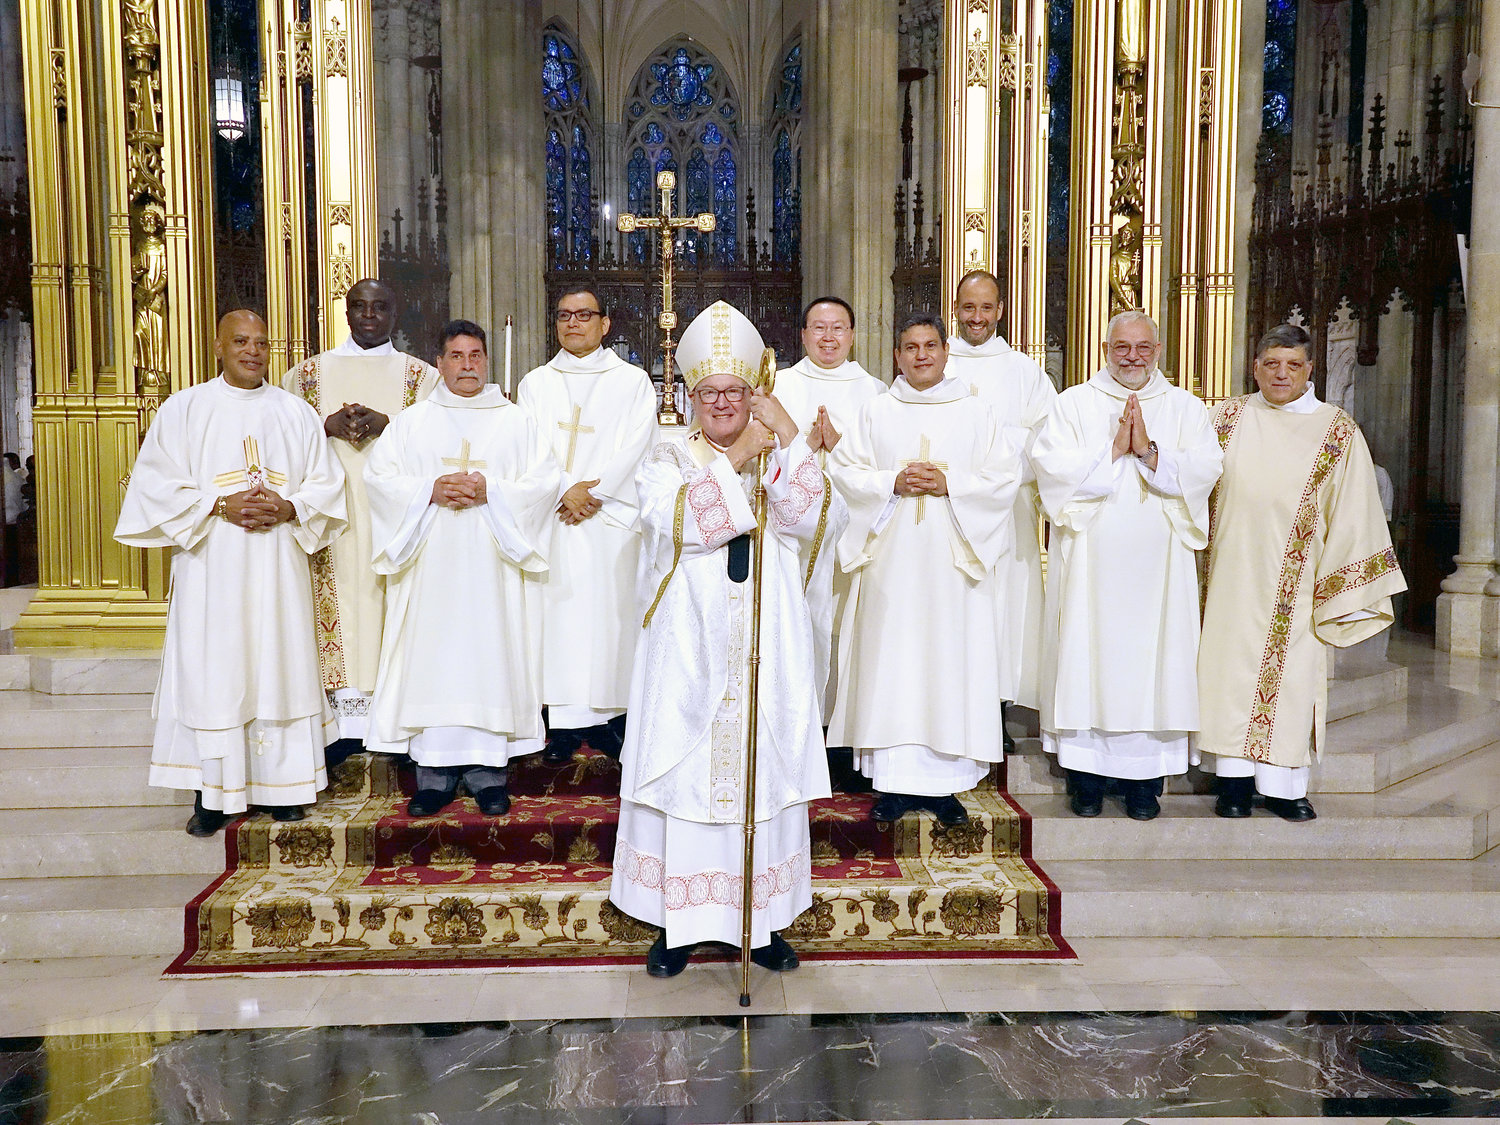 Cardinal Dolan, center in group photo, opposite page, was the principal celebrant and homilist during the June 19 Mass of Ordination for seven new permanent deacons at St. Patrick’s Cathedral. Also in the photo, taken after Mass, were, from left: Deacon James Bello, director of diaconate ministry and life; Deacon Martin Asiamah; Deacon Stephen DiGangi, Deacon Ferando Cortés, Deacon John Hum, Deacon Walter Lopez, Deacon Juan Martinez, Deacon Joseph Schiavone and Deacon Francis Orlando, director of diaconate formation.